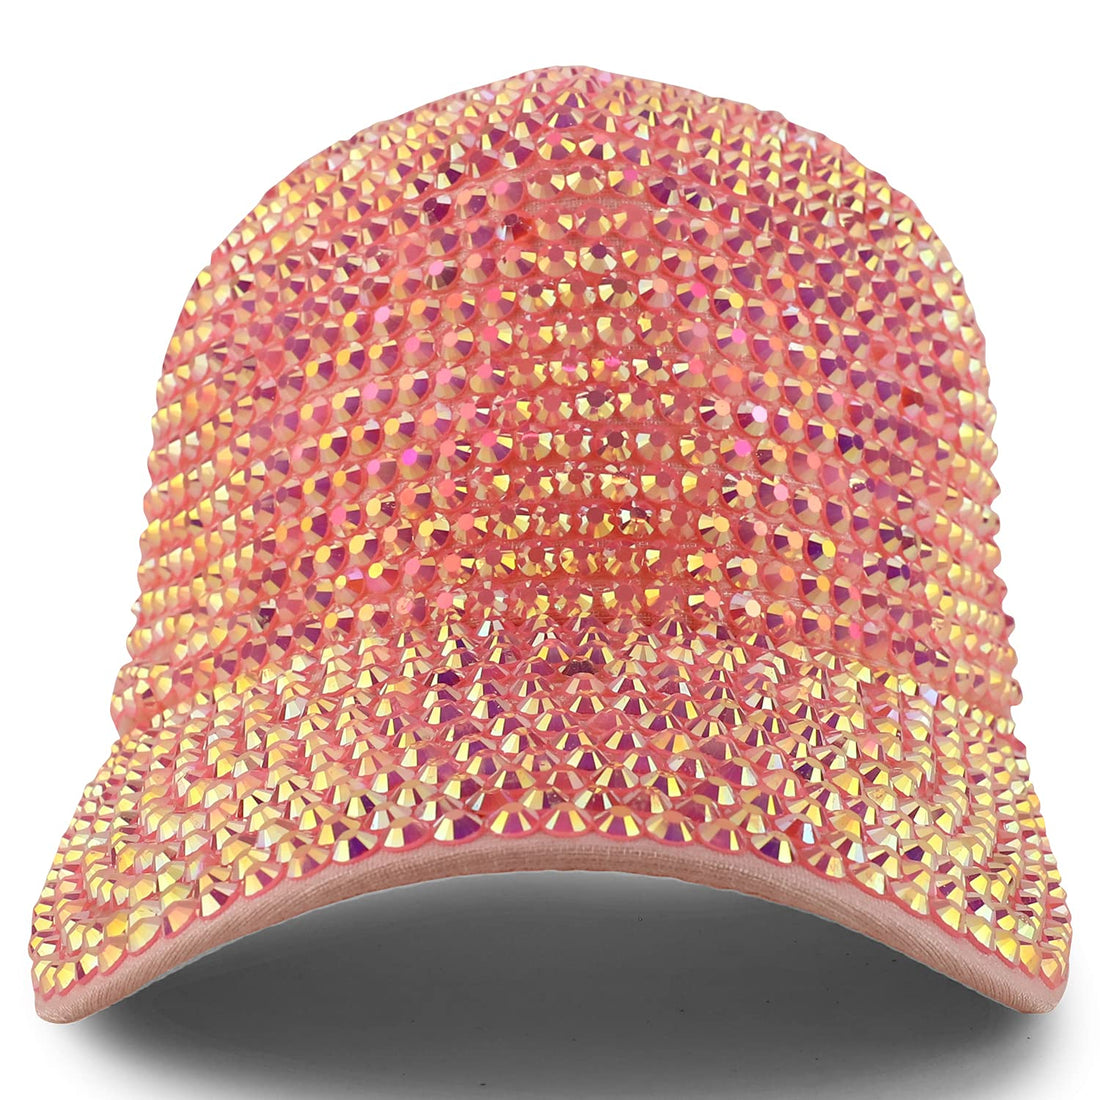 Trendy Apparel Shop Bling Stone Studs Bedazzle Structured Baseball Cap